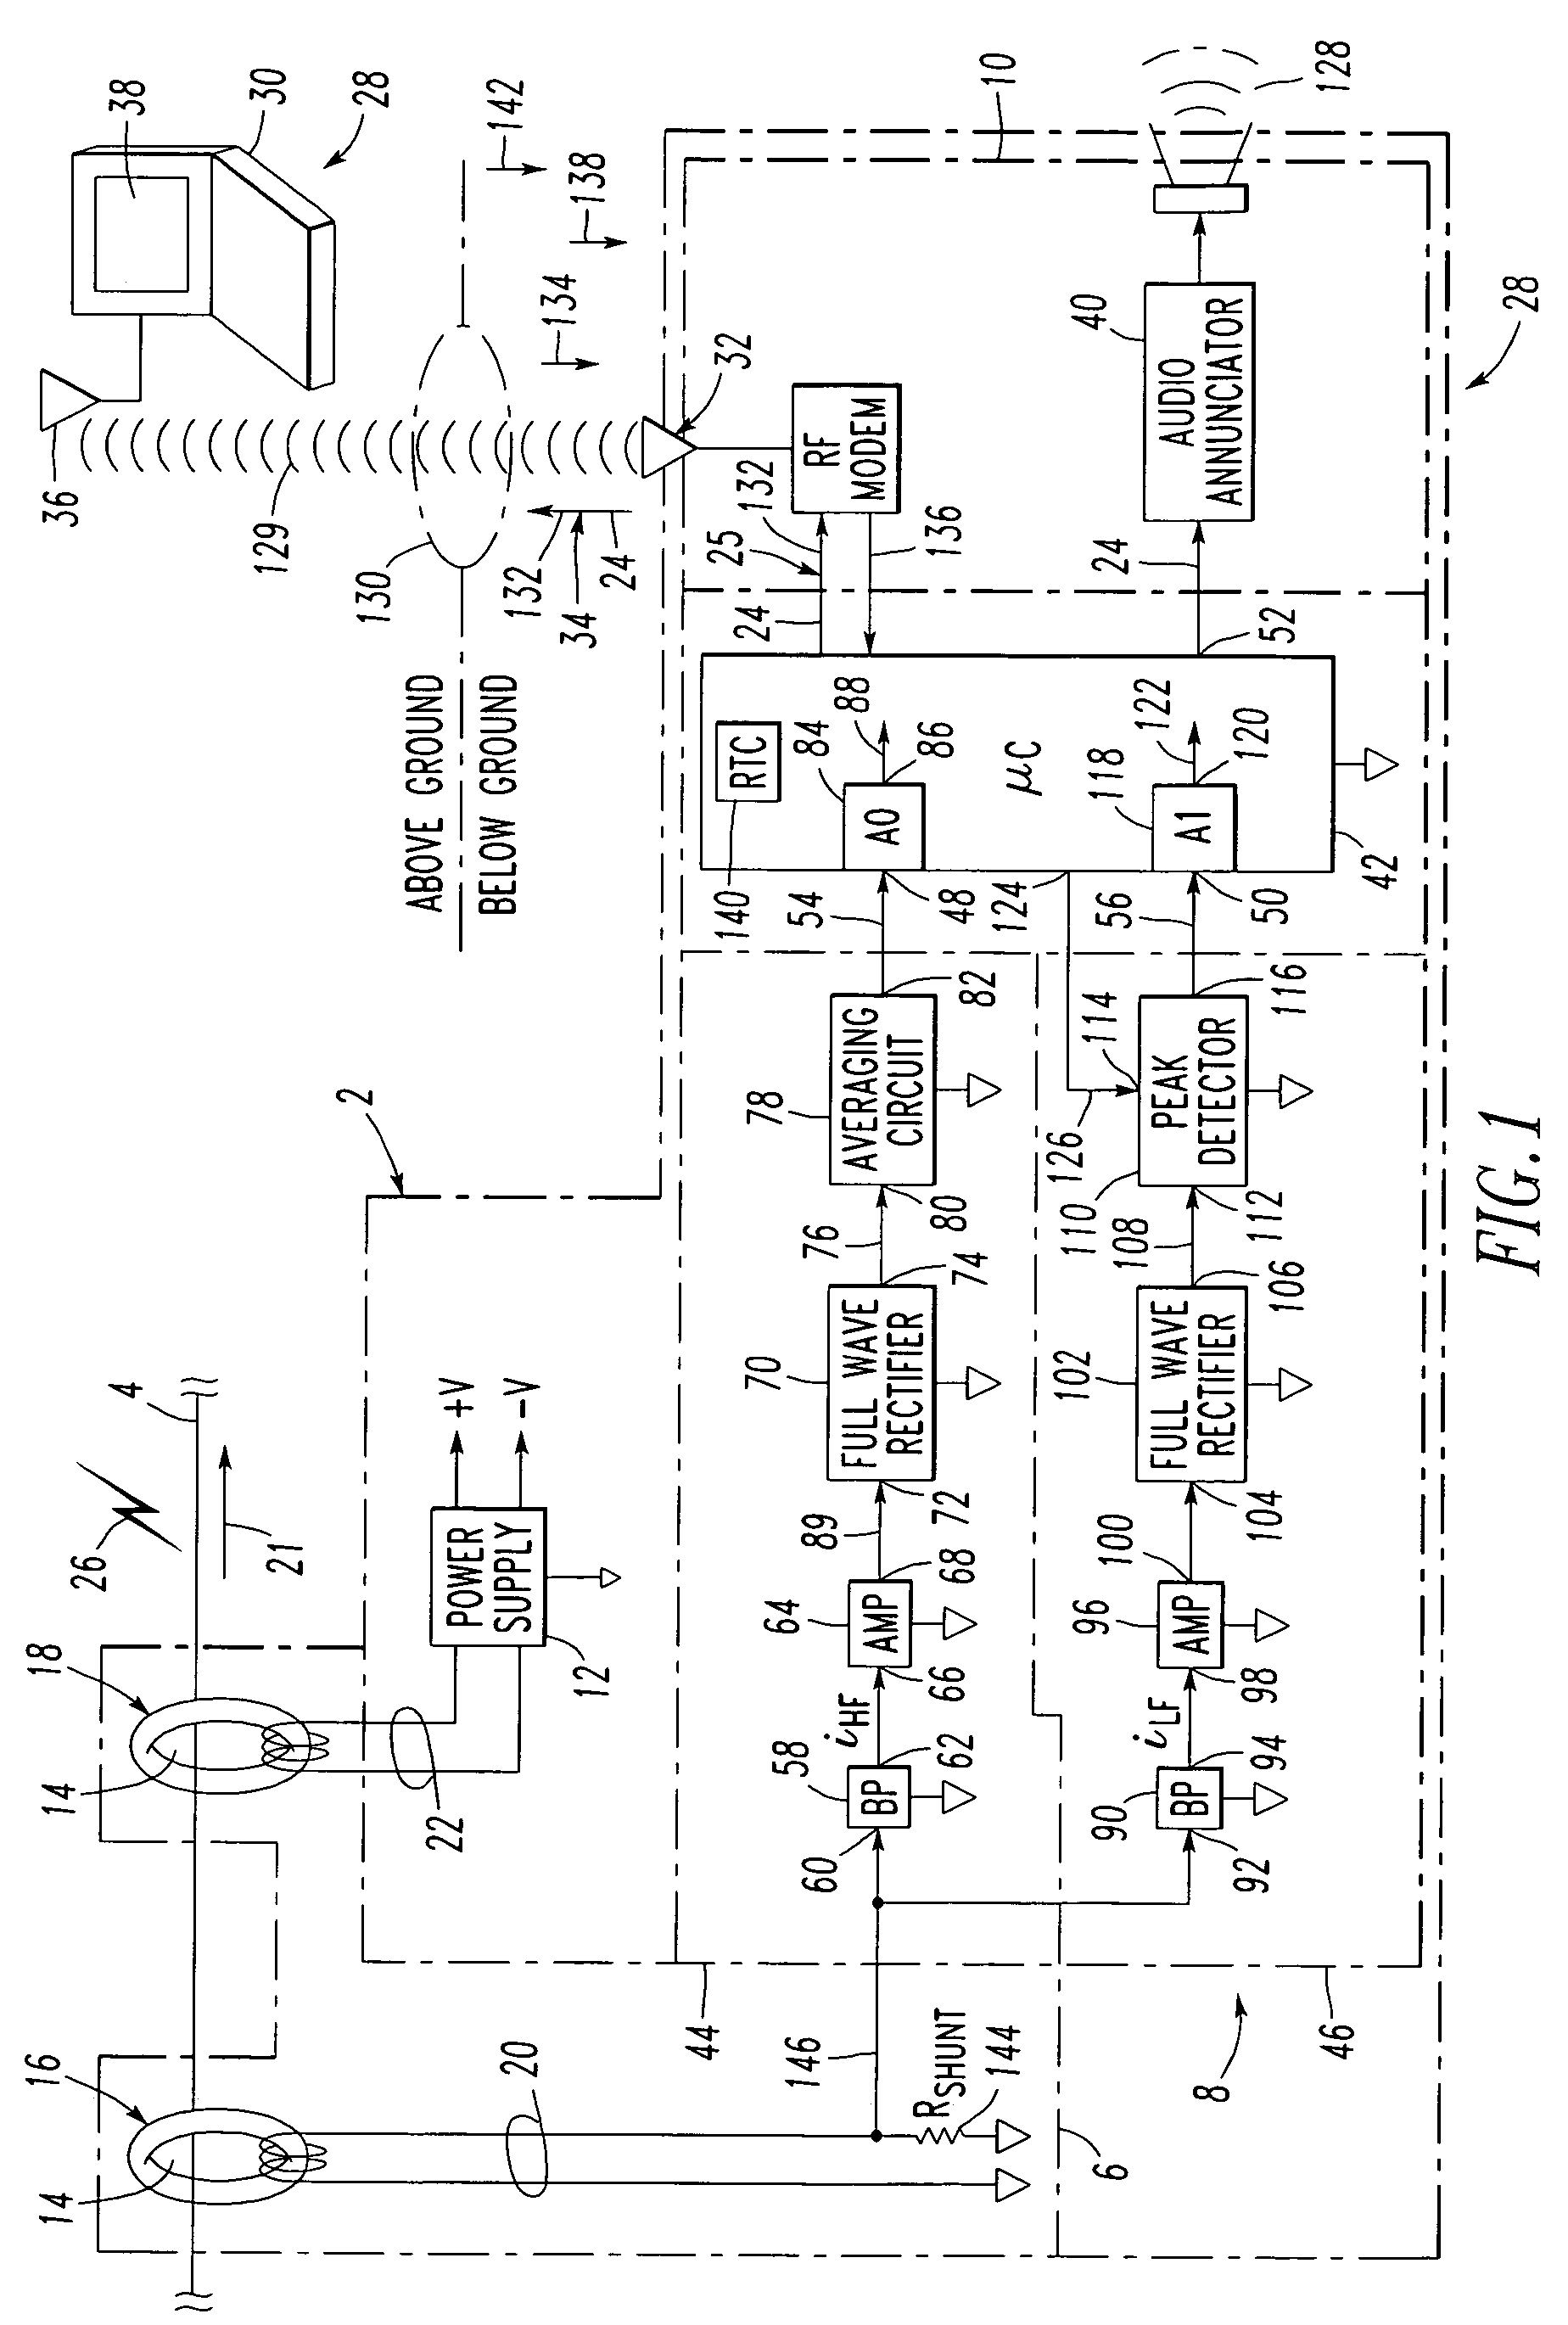 Arc fault detection apparatus, method and system for an underground electrical conductor